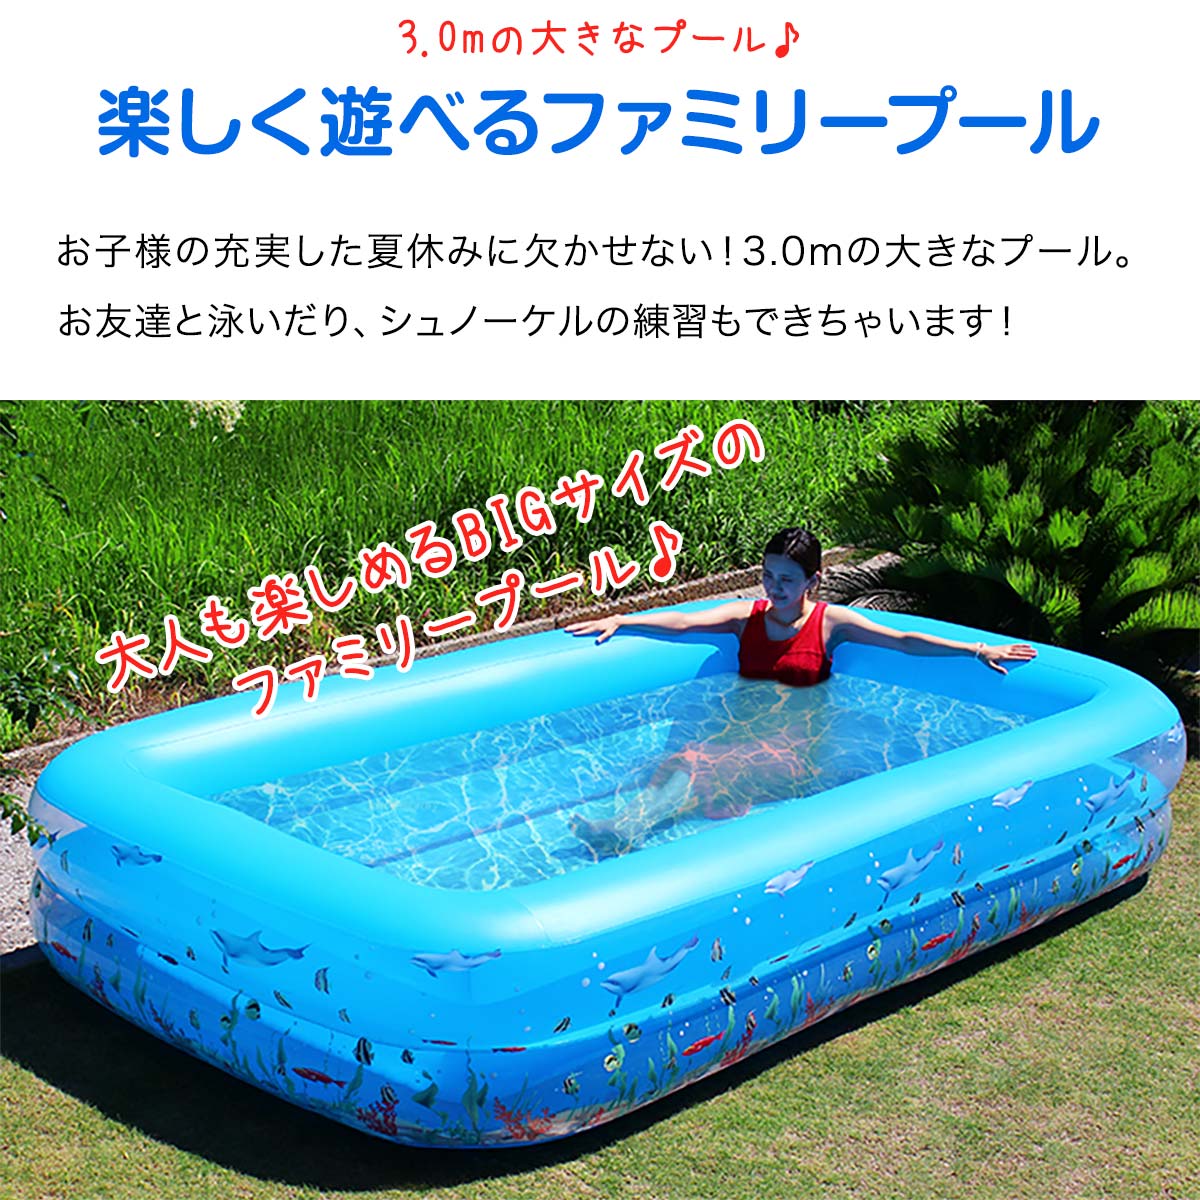 1 year guarantee pool home use pool 3m large for children Family pool popular recommendation stylish large Kids pool lovely playing in water garden veranda home child care free shipping 